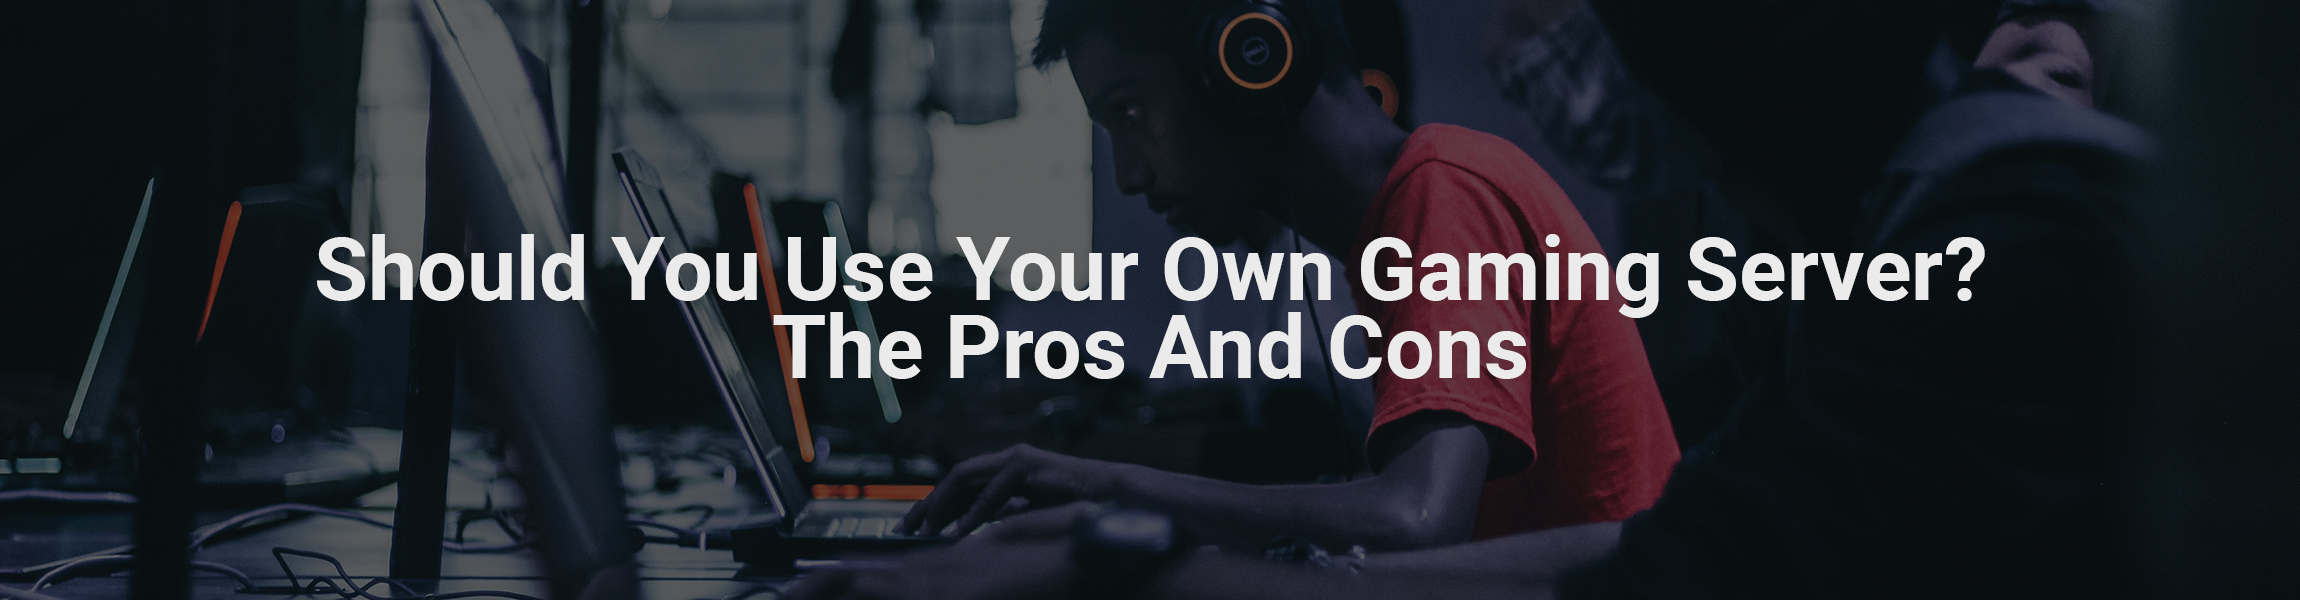 Should you use your own gaming server? pros and cons